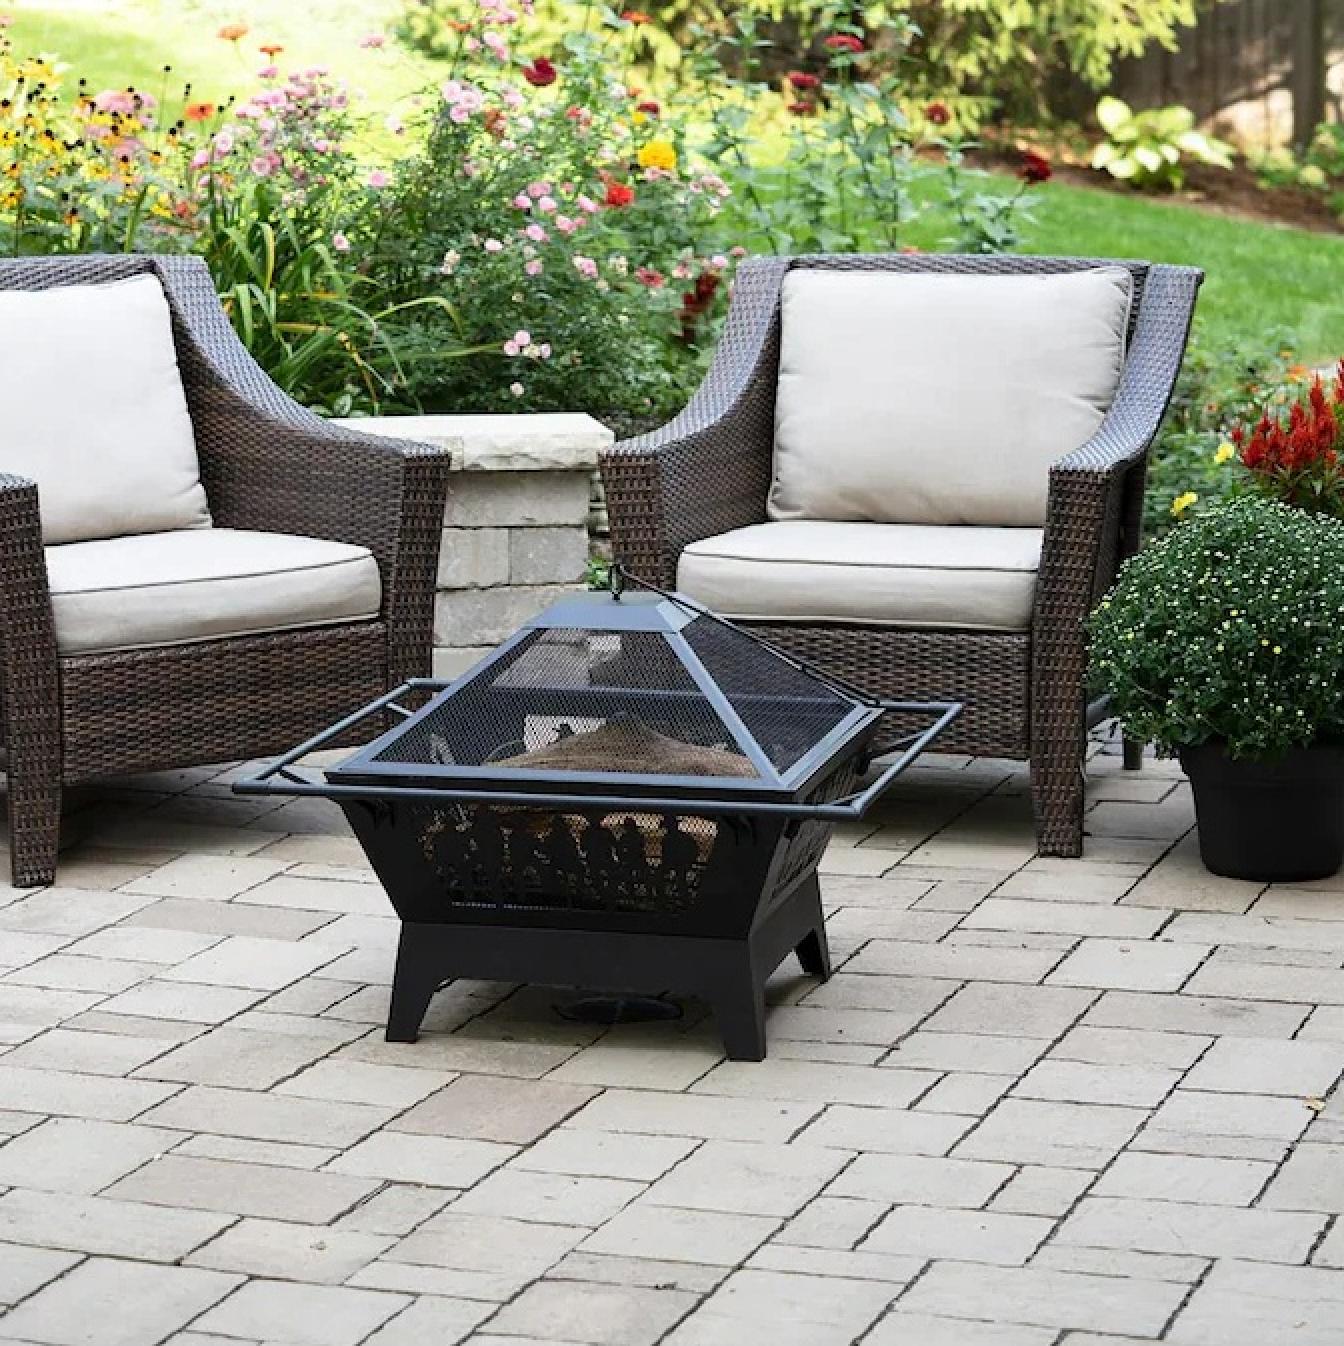 Blue Sky Outdoor Living Square Fire Pit